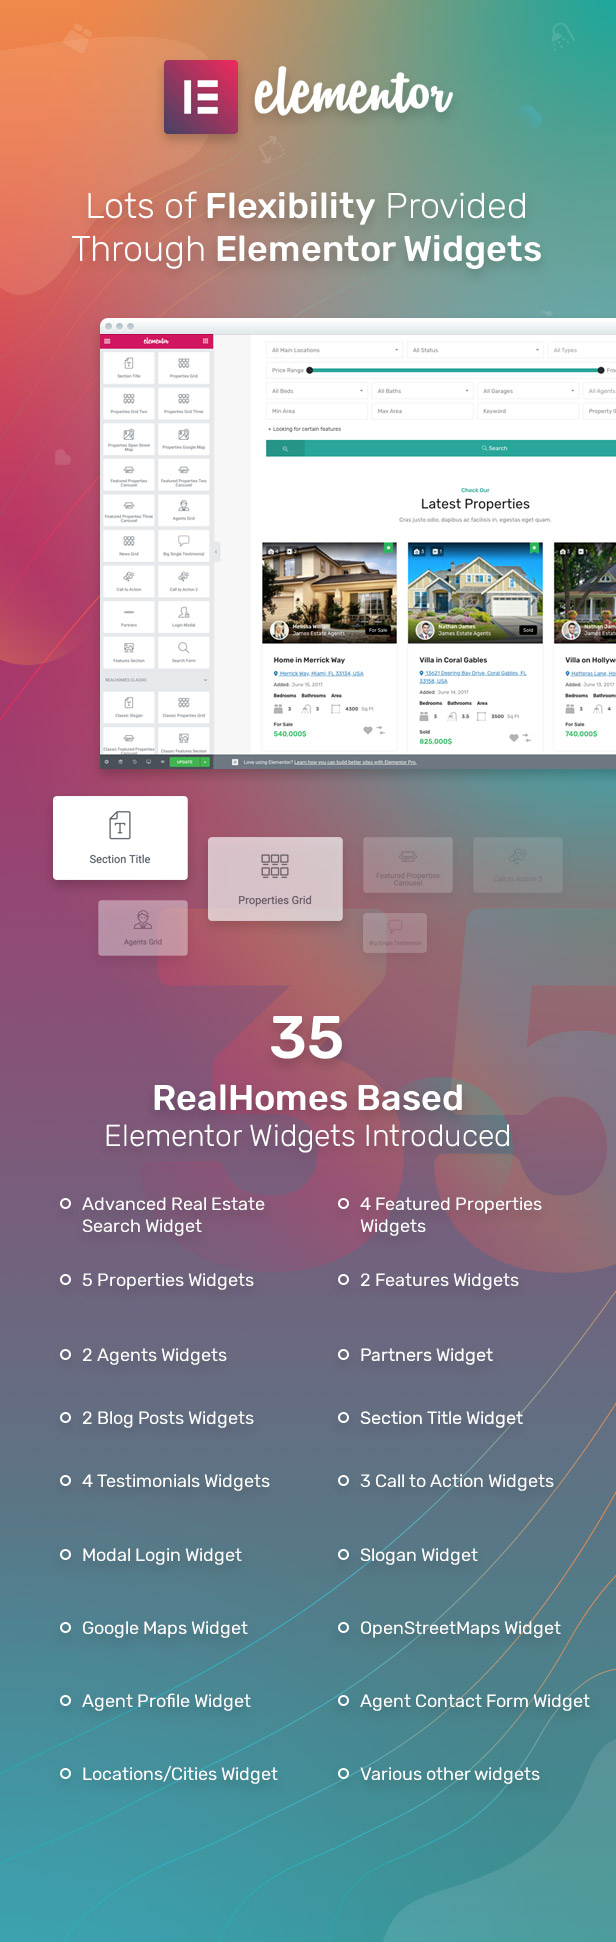 42 Elementor Widgets provided with RealHomes theme